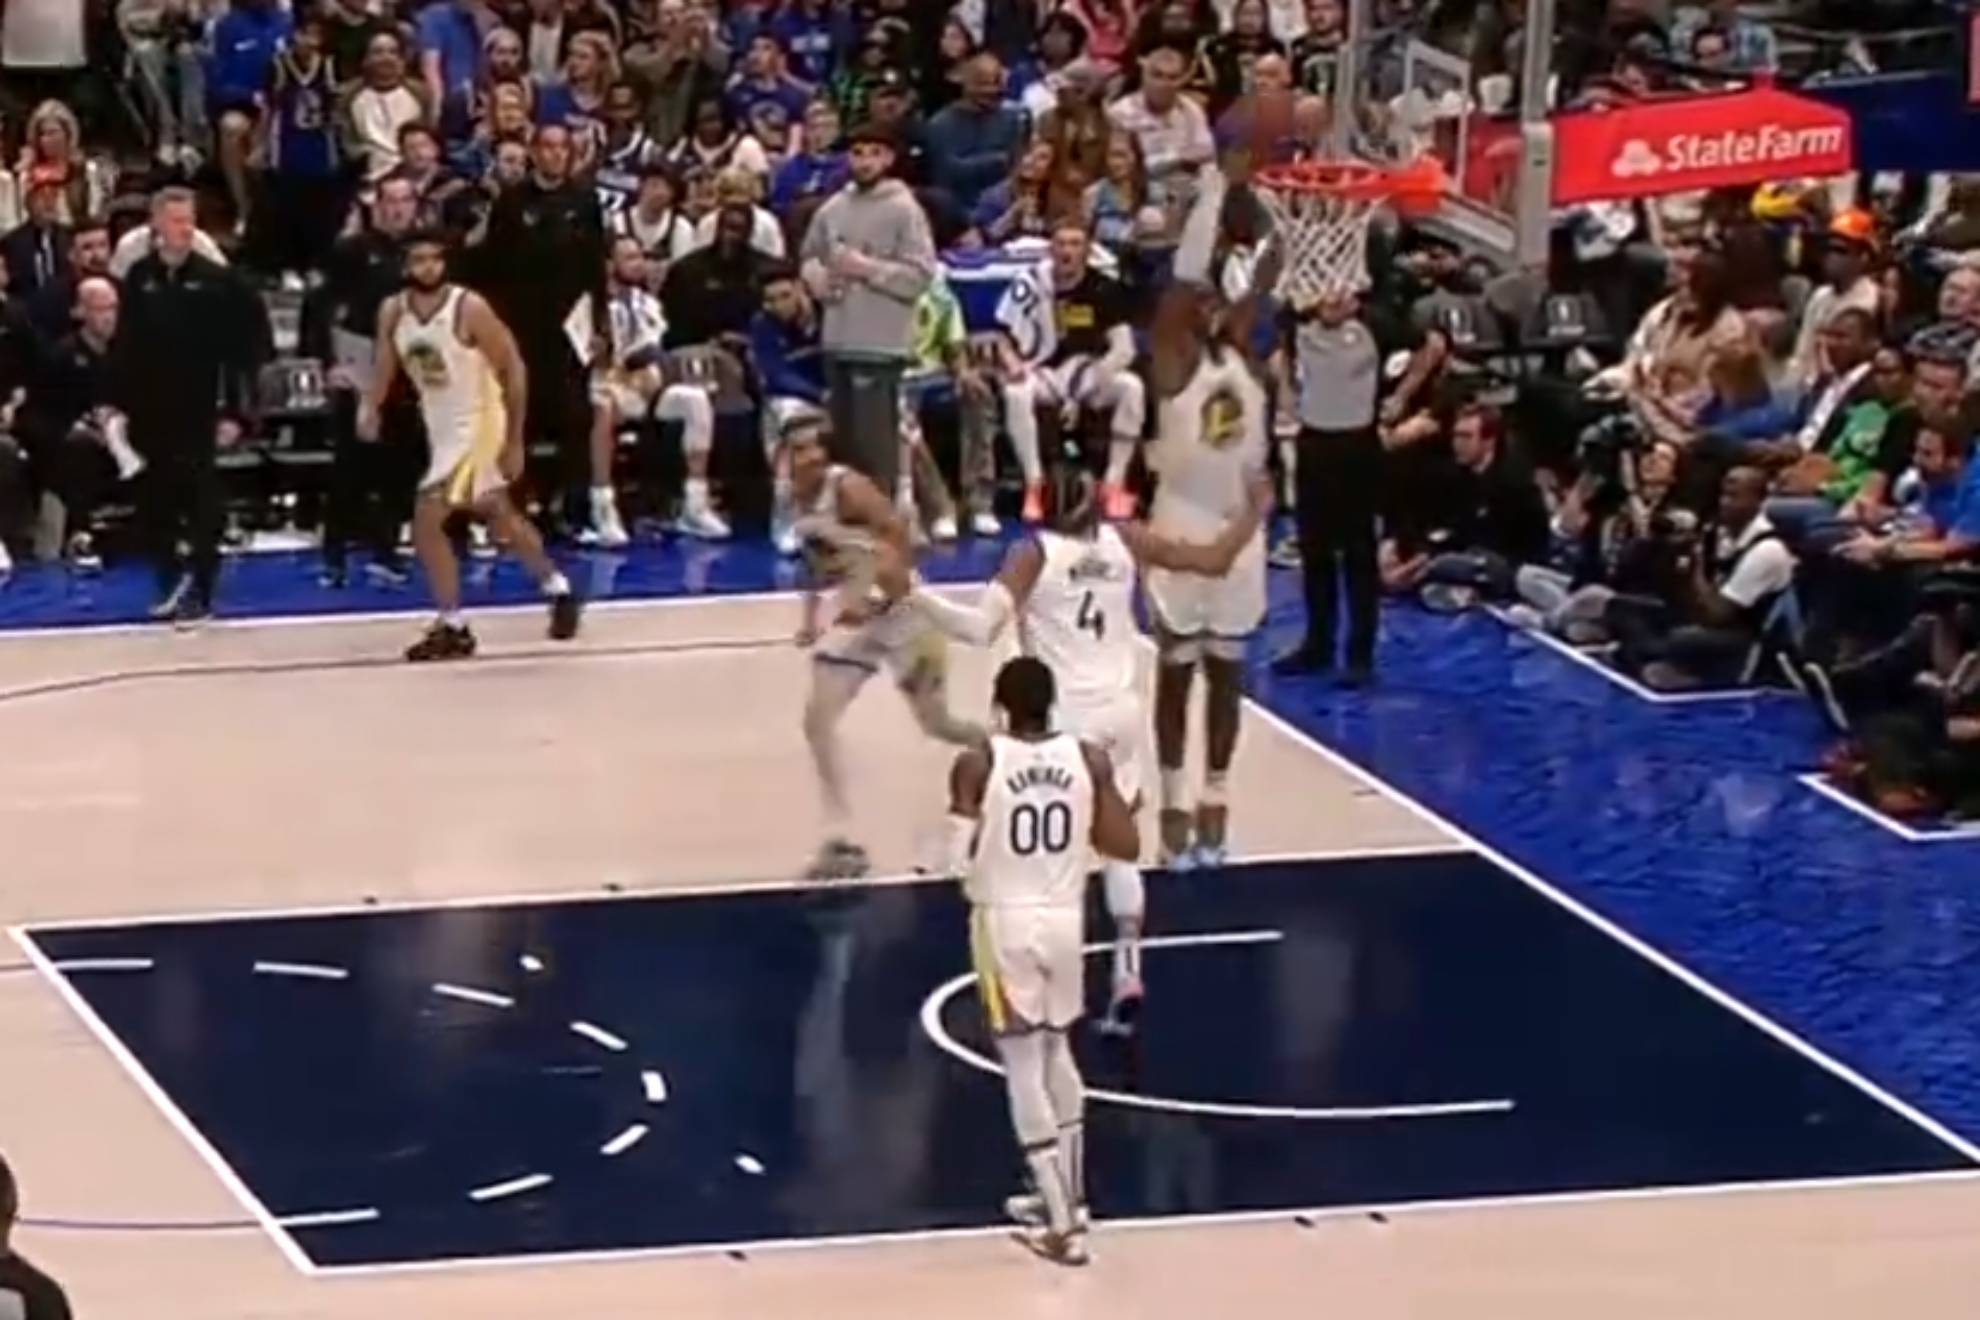 Warriors grab controversial win over Mavs in Doncic's return from injury: Worst officiating non-call mistake in NBA history